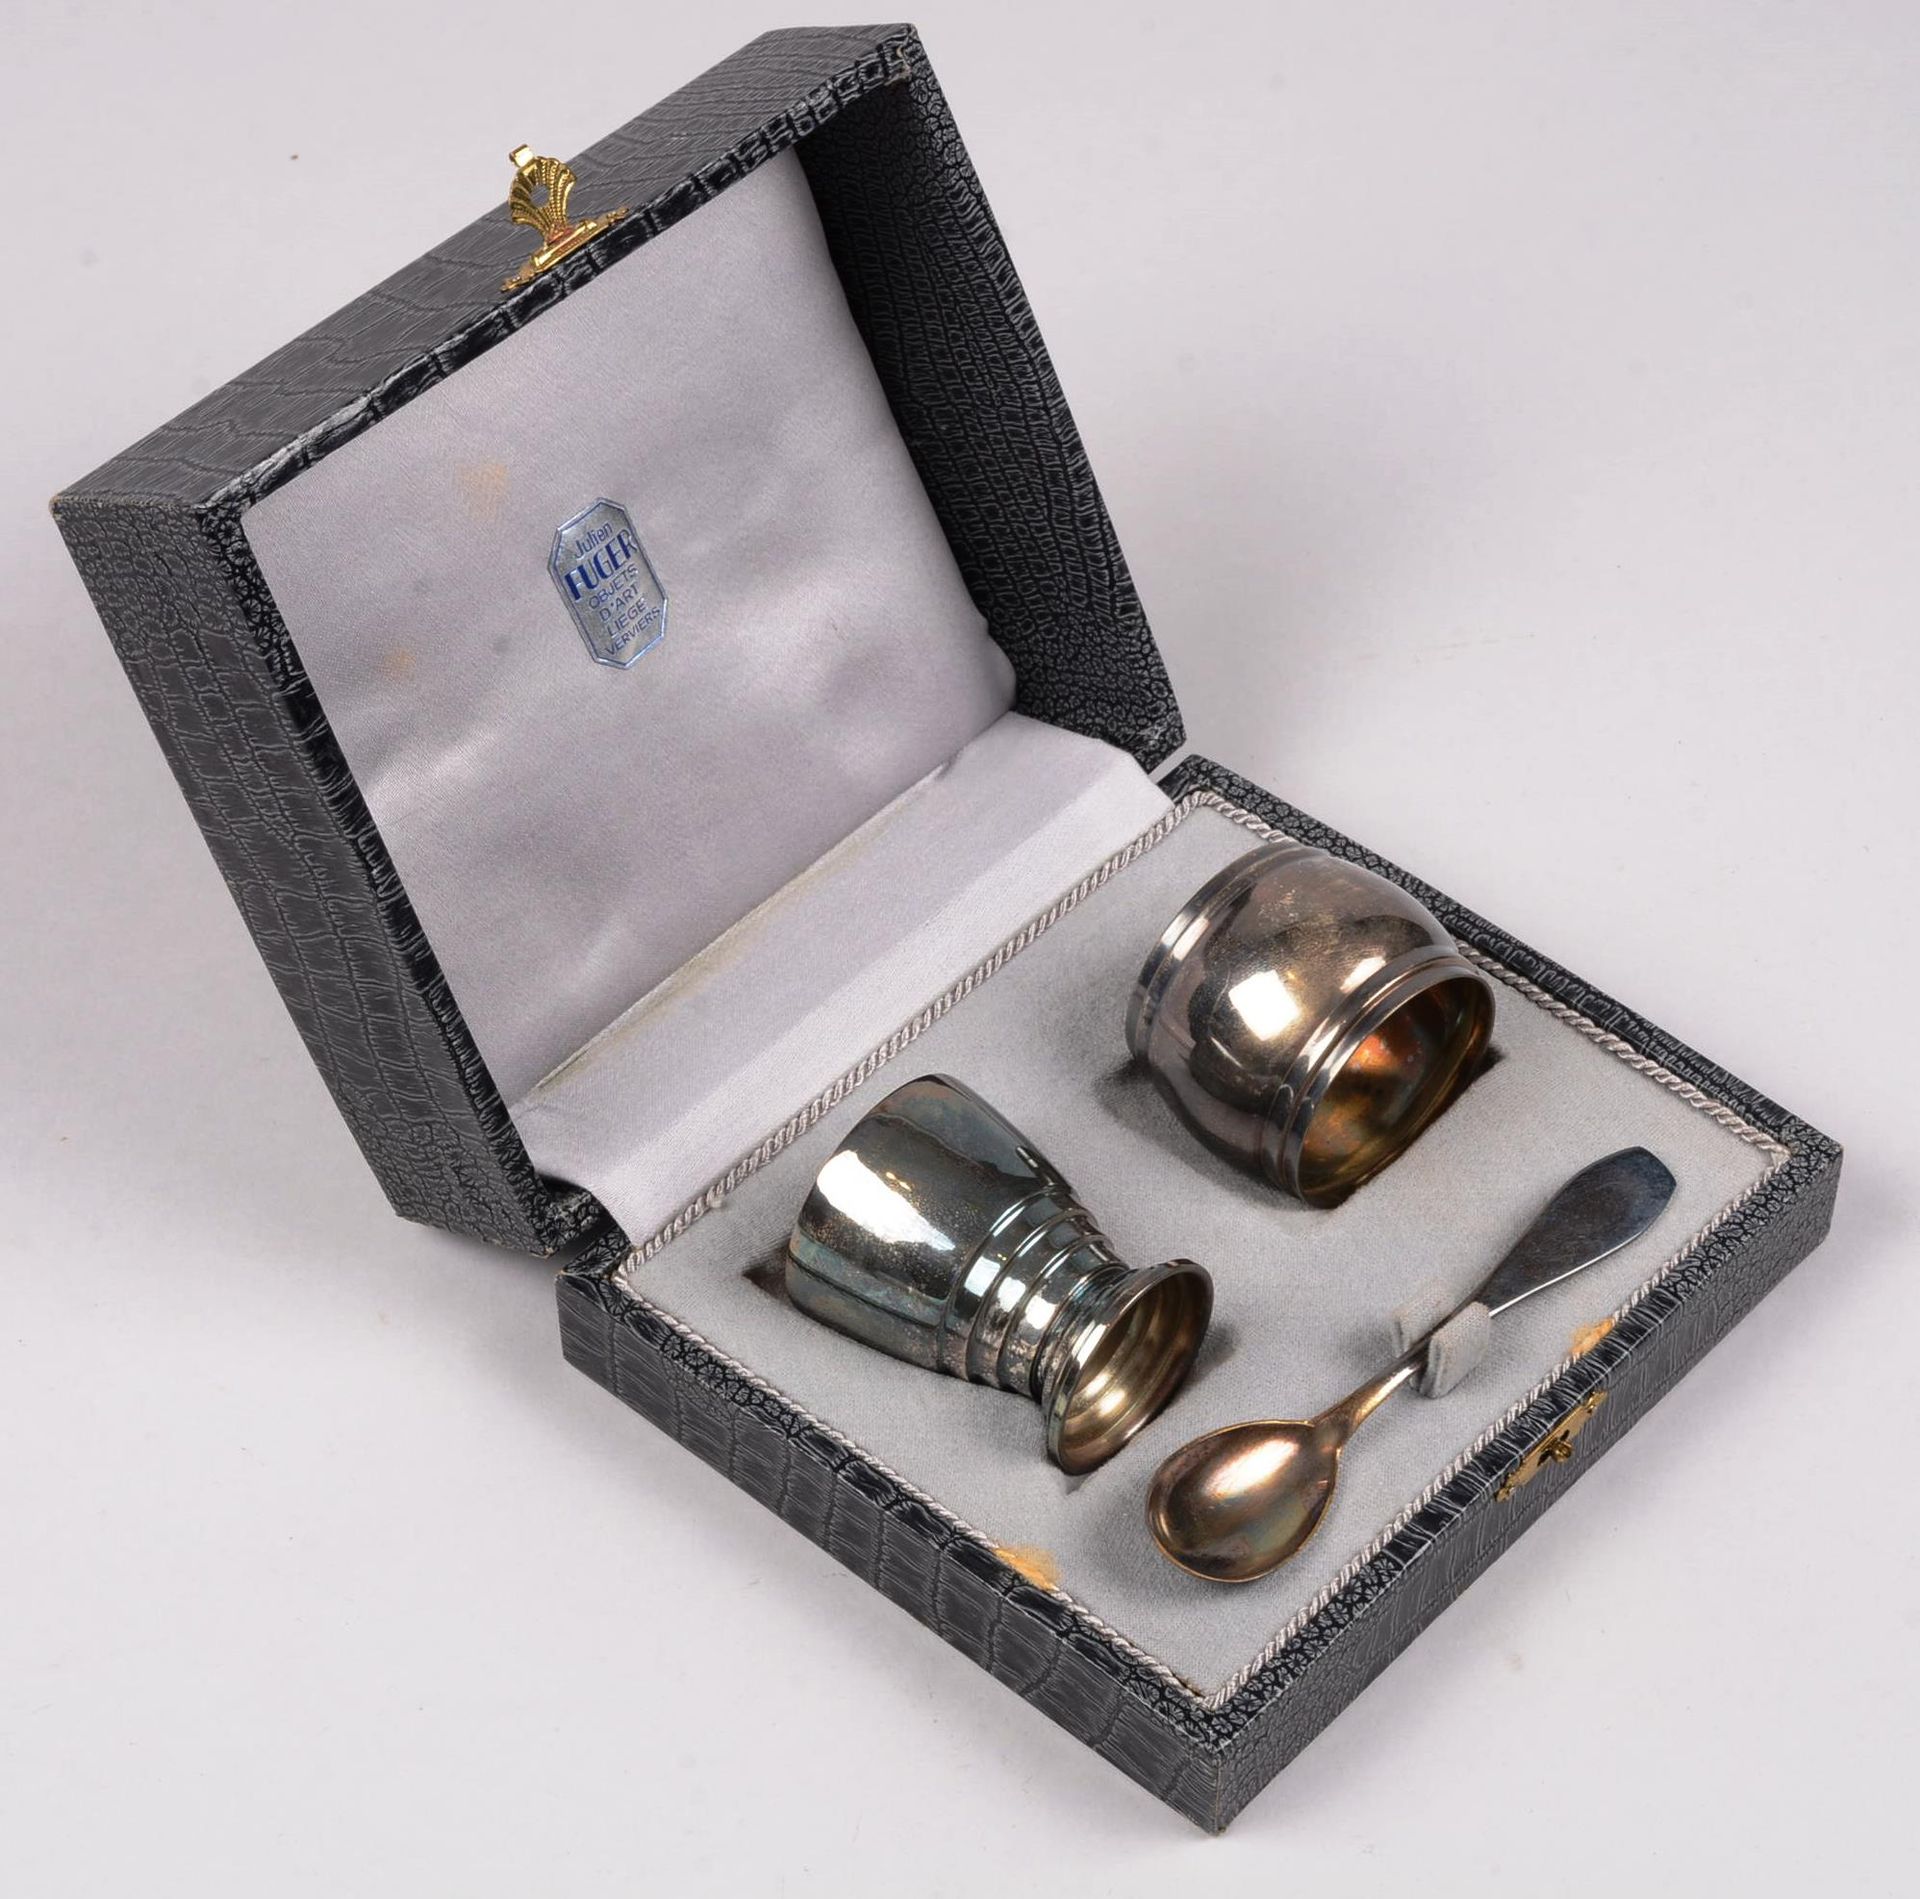 COFFRET DE BAPTEME Baptism box composed of three silver plated pieces, a small s&hellip;